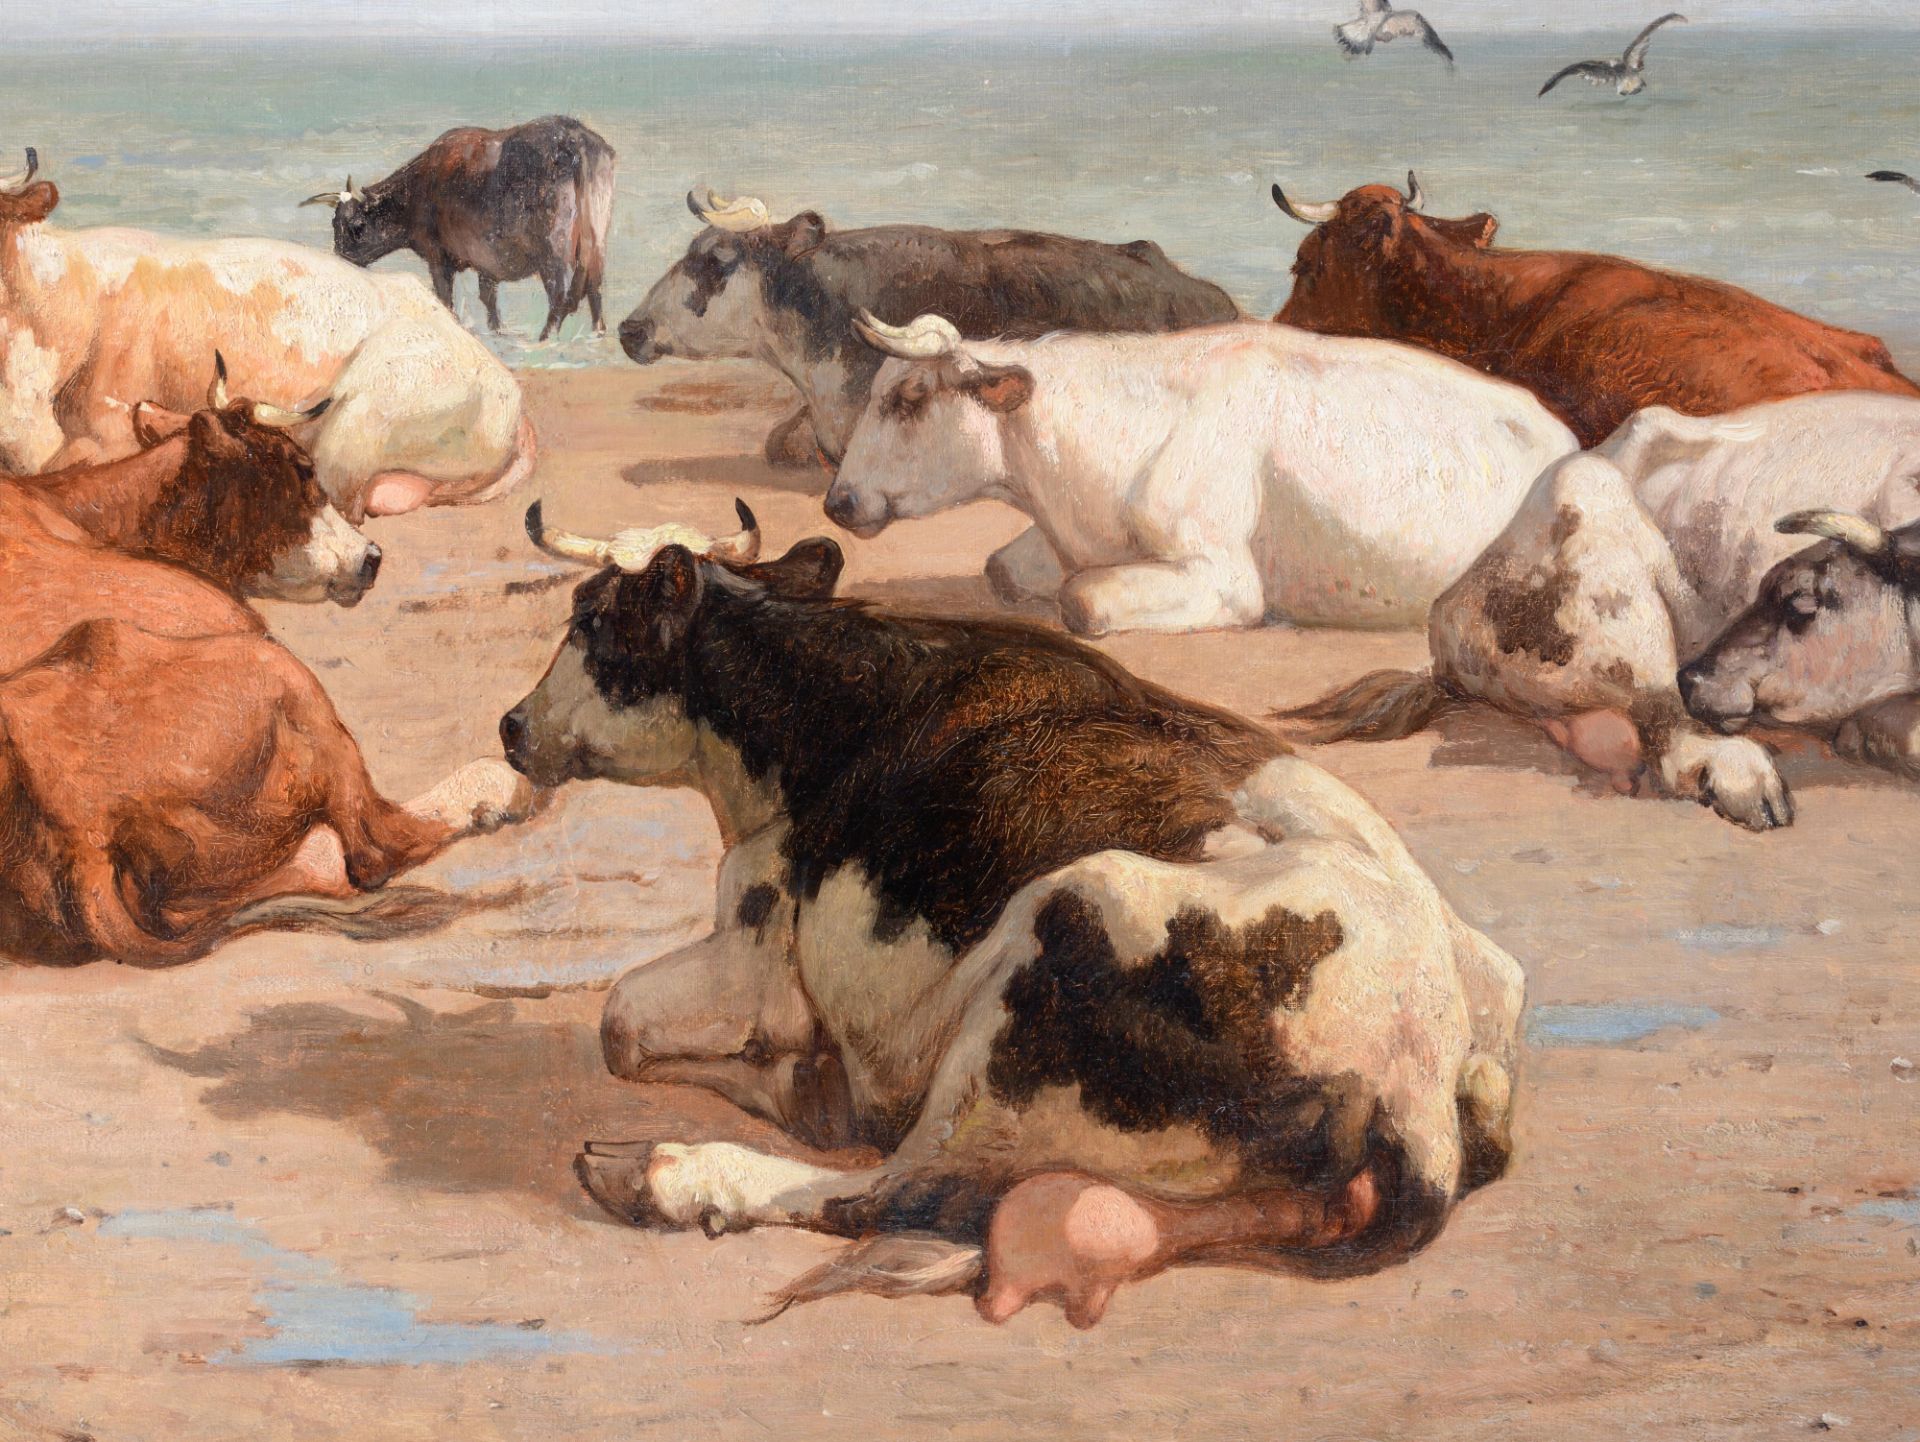 Robbe L. cows resting at the beach, dated (18)78, oil on canvas, 93 x 135 cm - Image 8 of 9